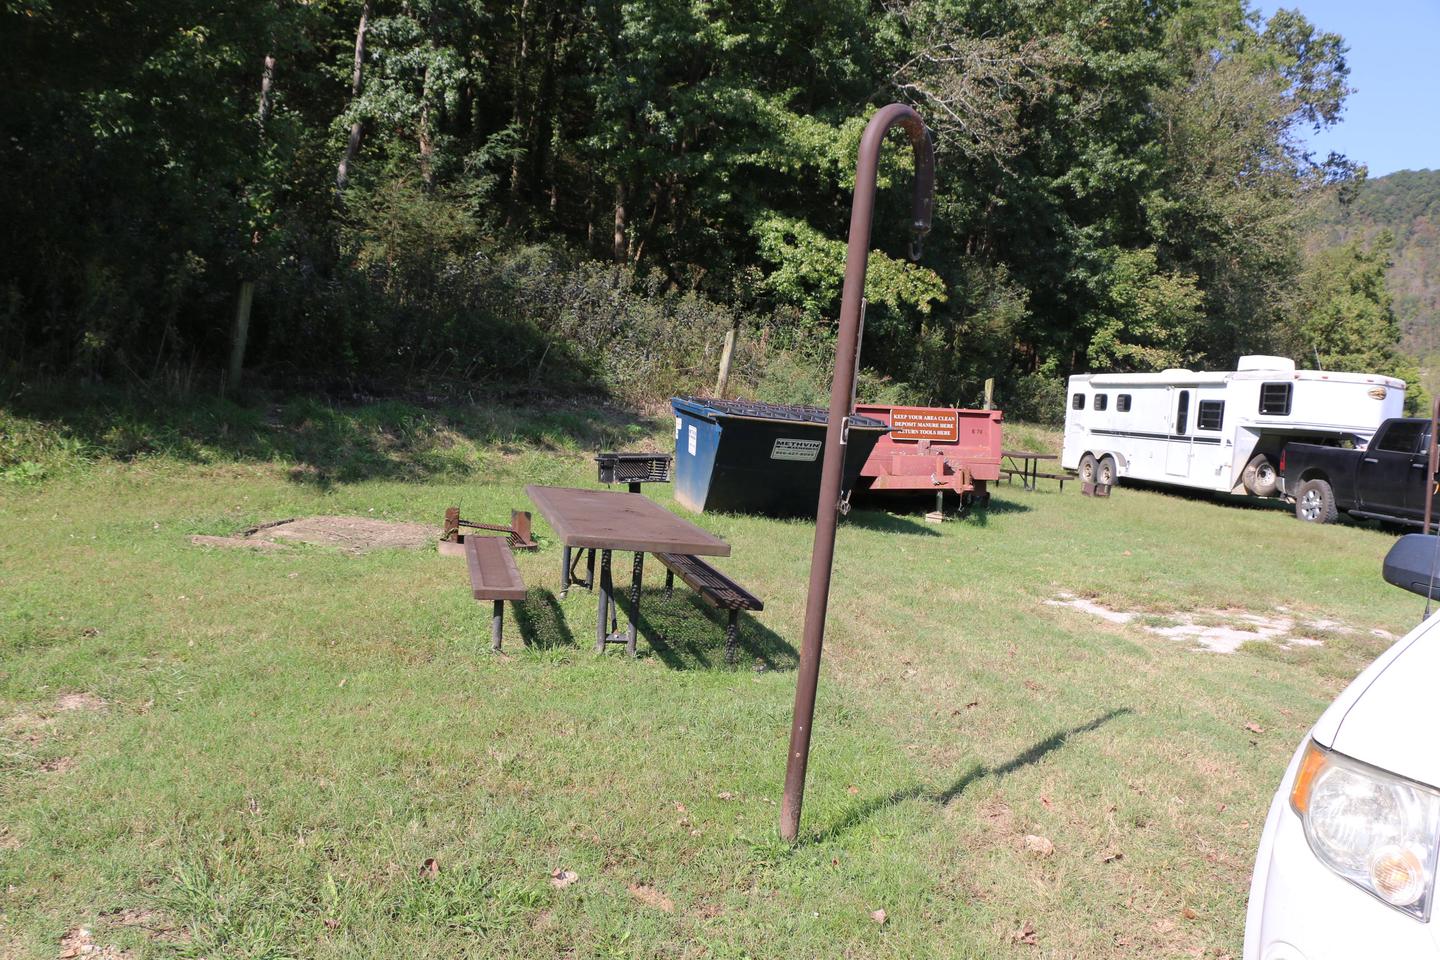 SC Horse Site 40-2Steel Creek Horse Camp Site #40 - dumpster and manure wagon